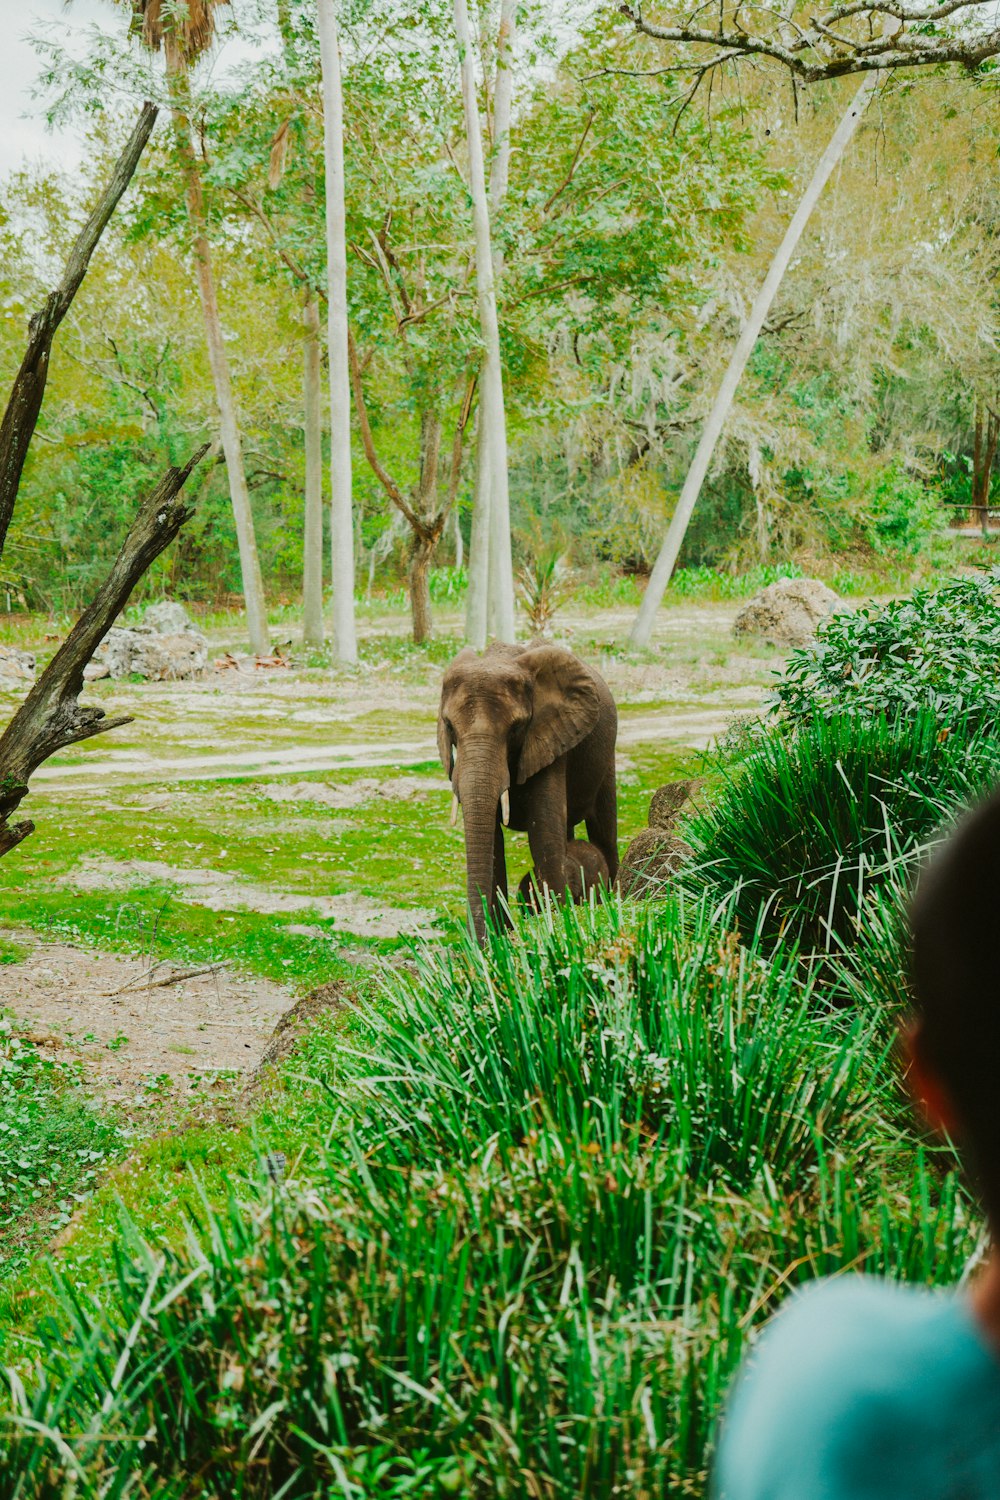 an elephant is standing in the middle of a grassy area